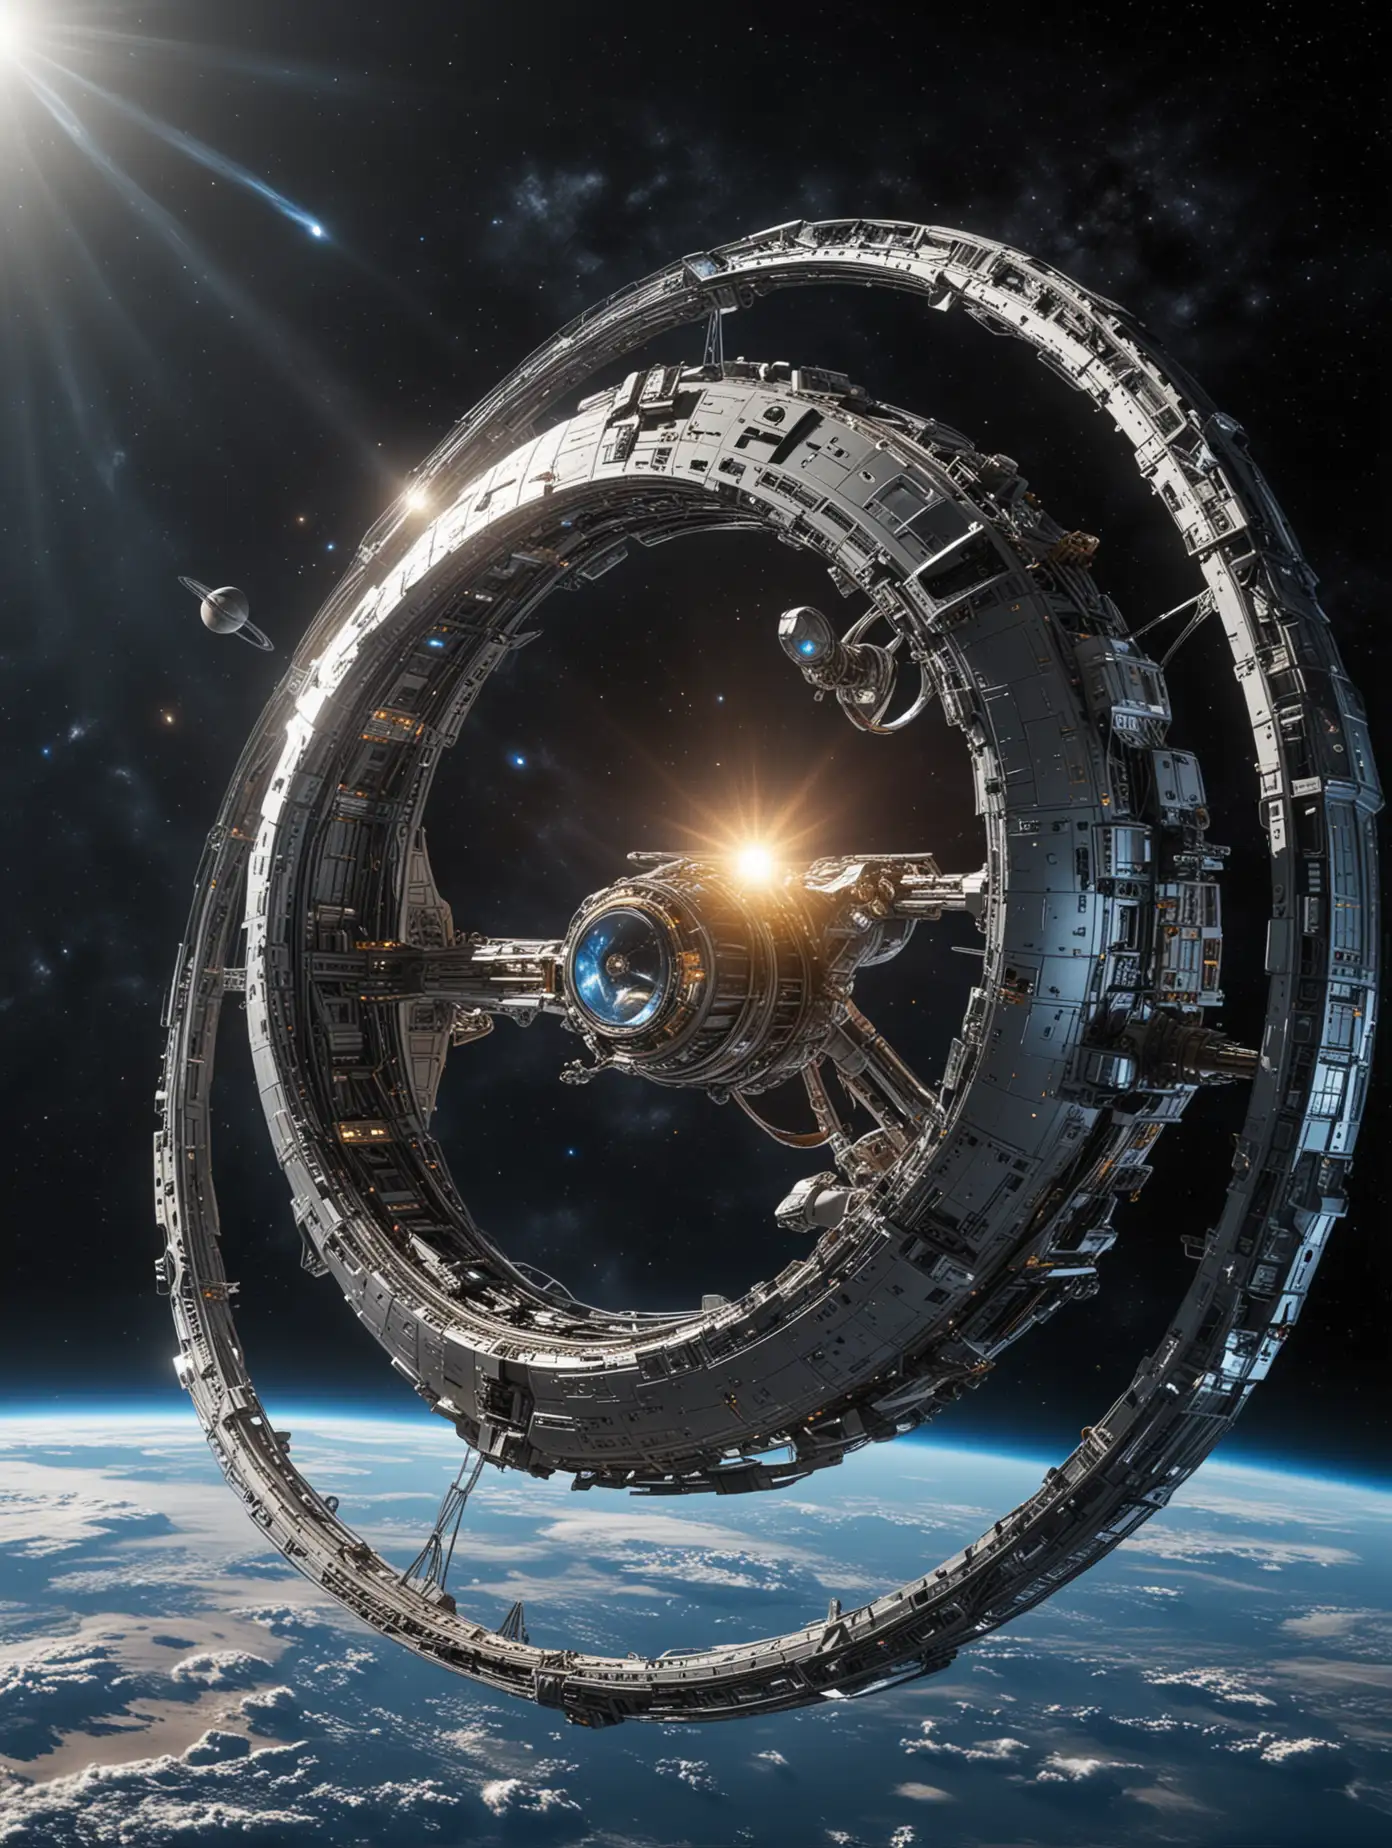 "Create an image of a futuristic spacecraft that represents an alliance between organic and synthetic intelligence. The ship is composed of a sleek, cylindrical central hub that symbolizes advanced human engineering. This hub is connected to a larger circular frame by eight robust fairings, resembling the spokes of a wheel. The circular frame is actually a massive torus ring, which encircles the central hub like a metallic halo. The ring and the hub are equipped with various technological details that hint at a fusion of AI and human design philosophies: smooth surfaces, intricate paneling, and glowing lights. The spacecraft is set against a backdrop of space, suggesting that it's on the edge of a distant solar system. This ship is ready to engage in a momentous event, a meeting or a standoff in the void of space, a crucial moment that will determine the fate of its coalition. The image should capture the grandeur and the potential of this cosmic rendezvous."